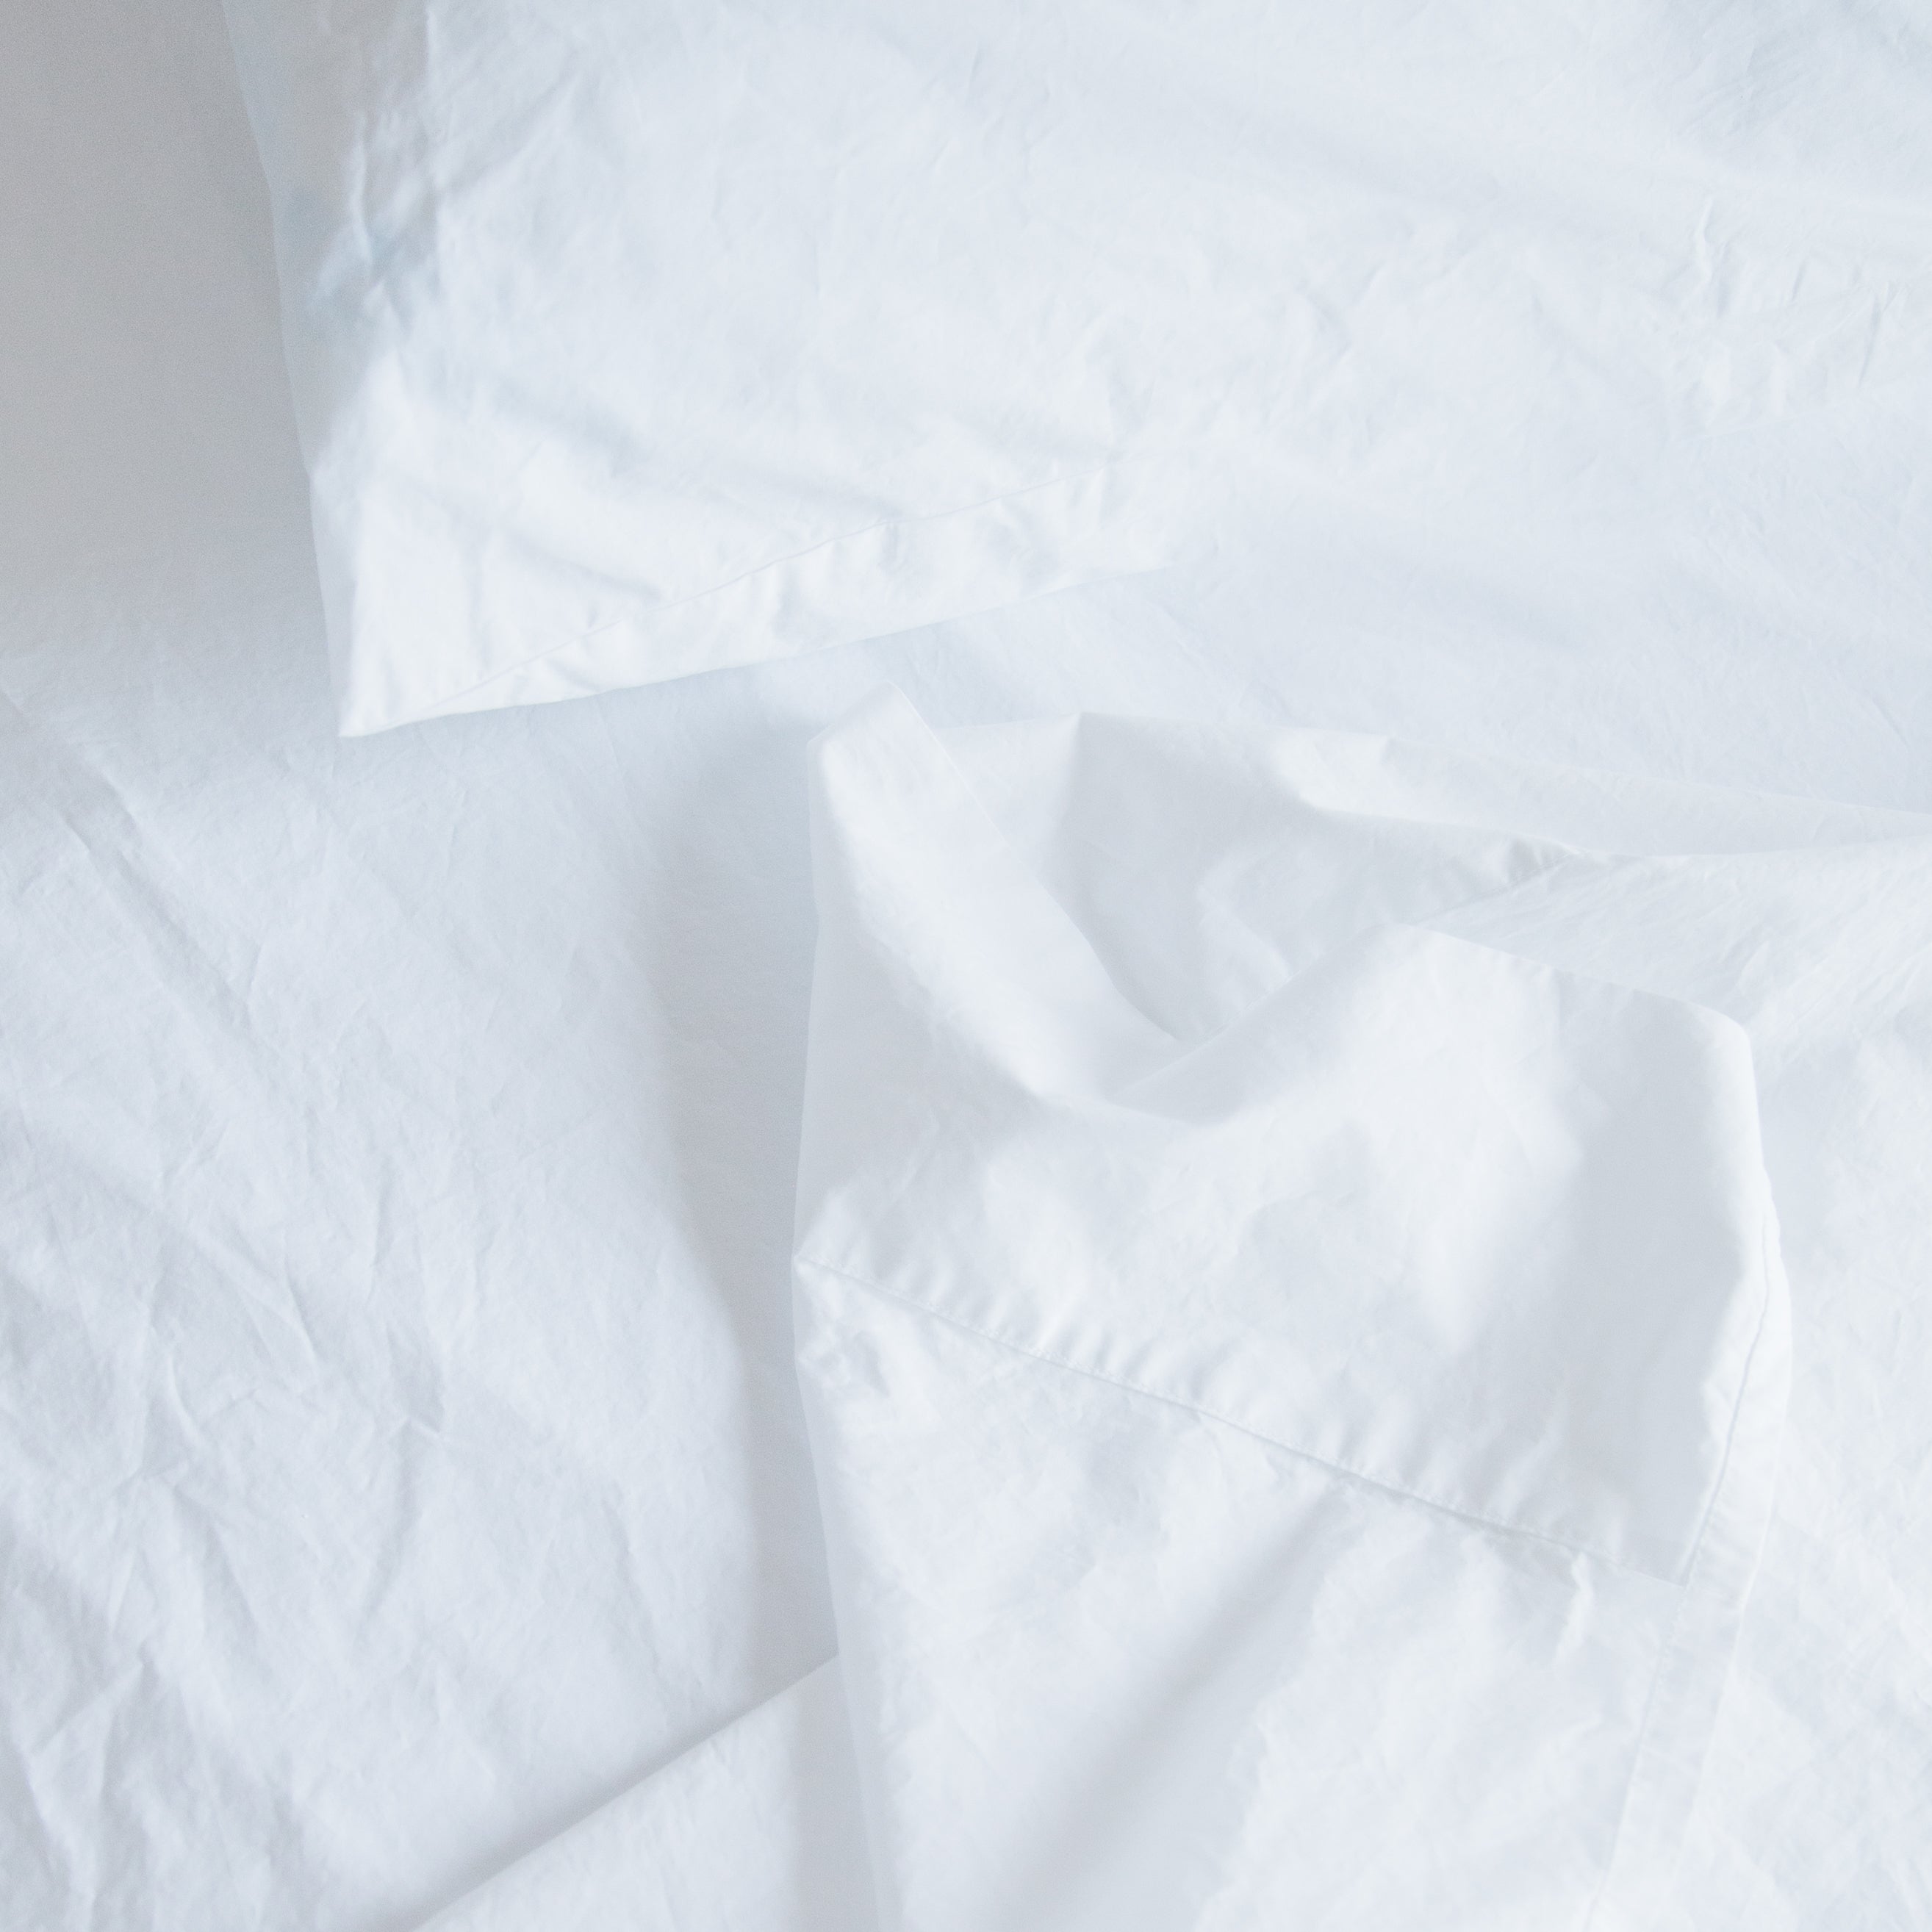 A detail view showing the soft texture of Oolie organic cotton sheets in white cotton installed on a bed.